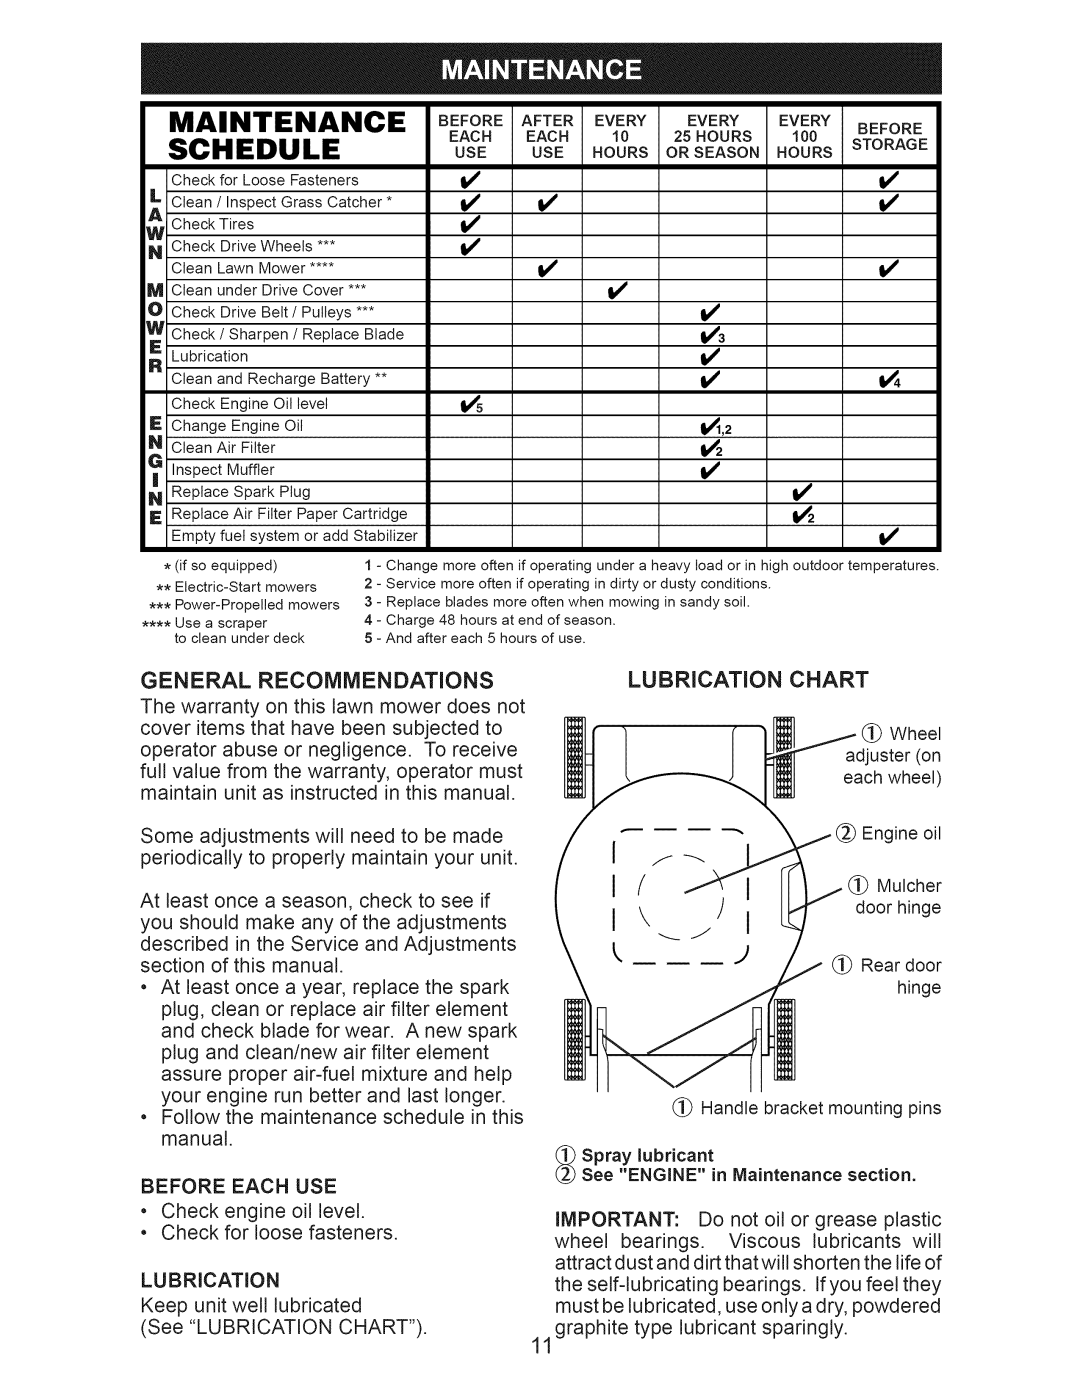 Craftsman 917.389051 manual Maintenance, Schedule, Use Hours 